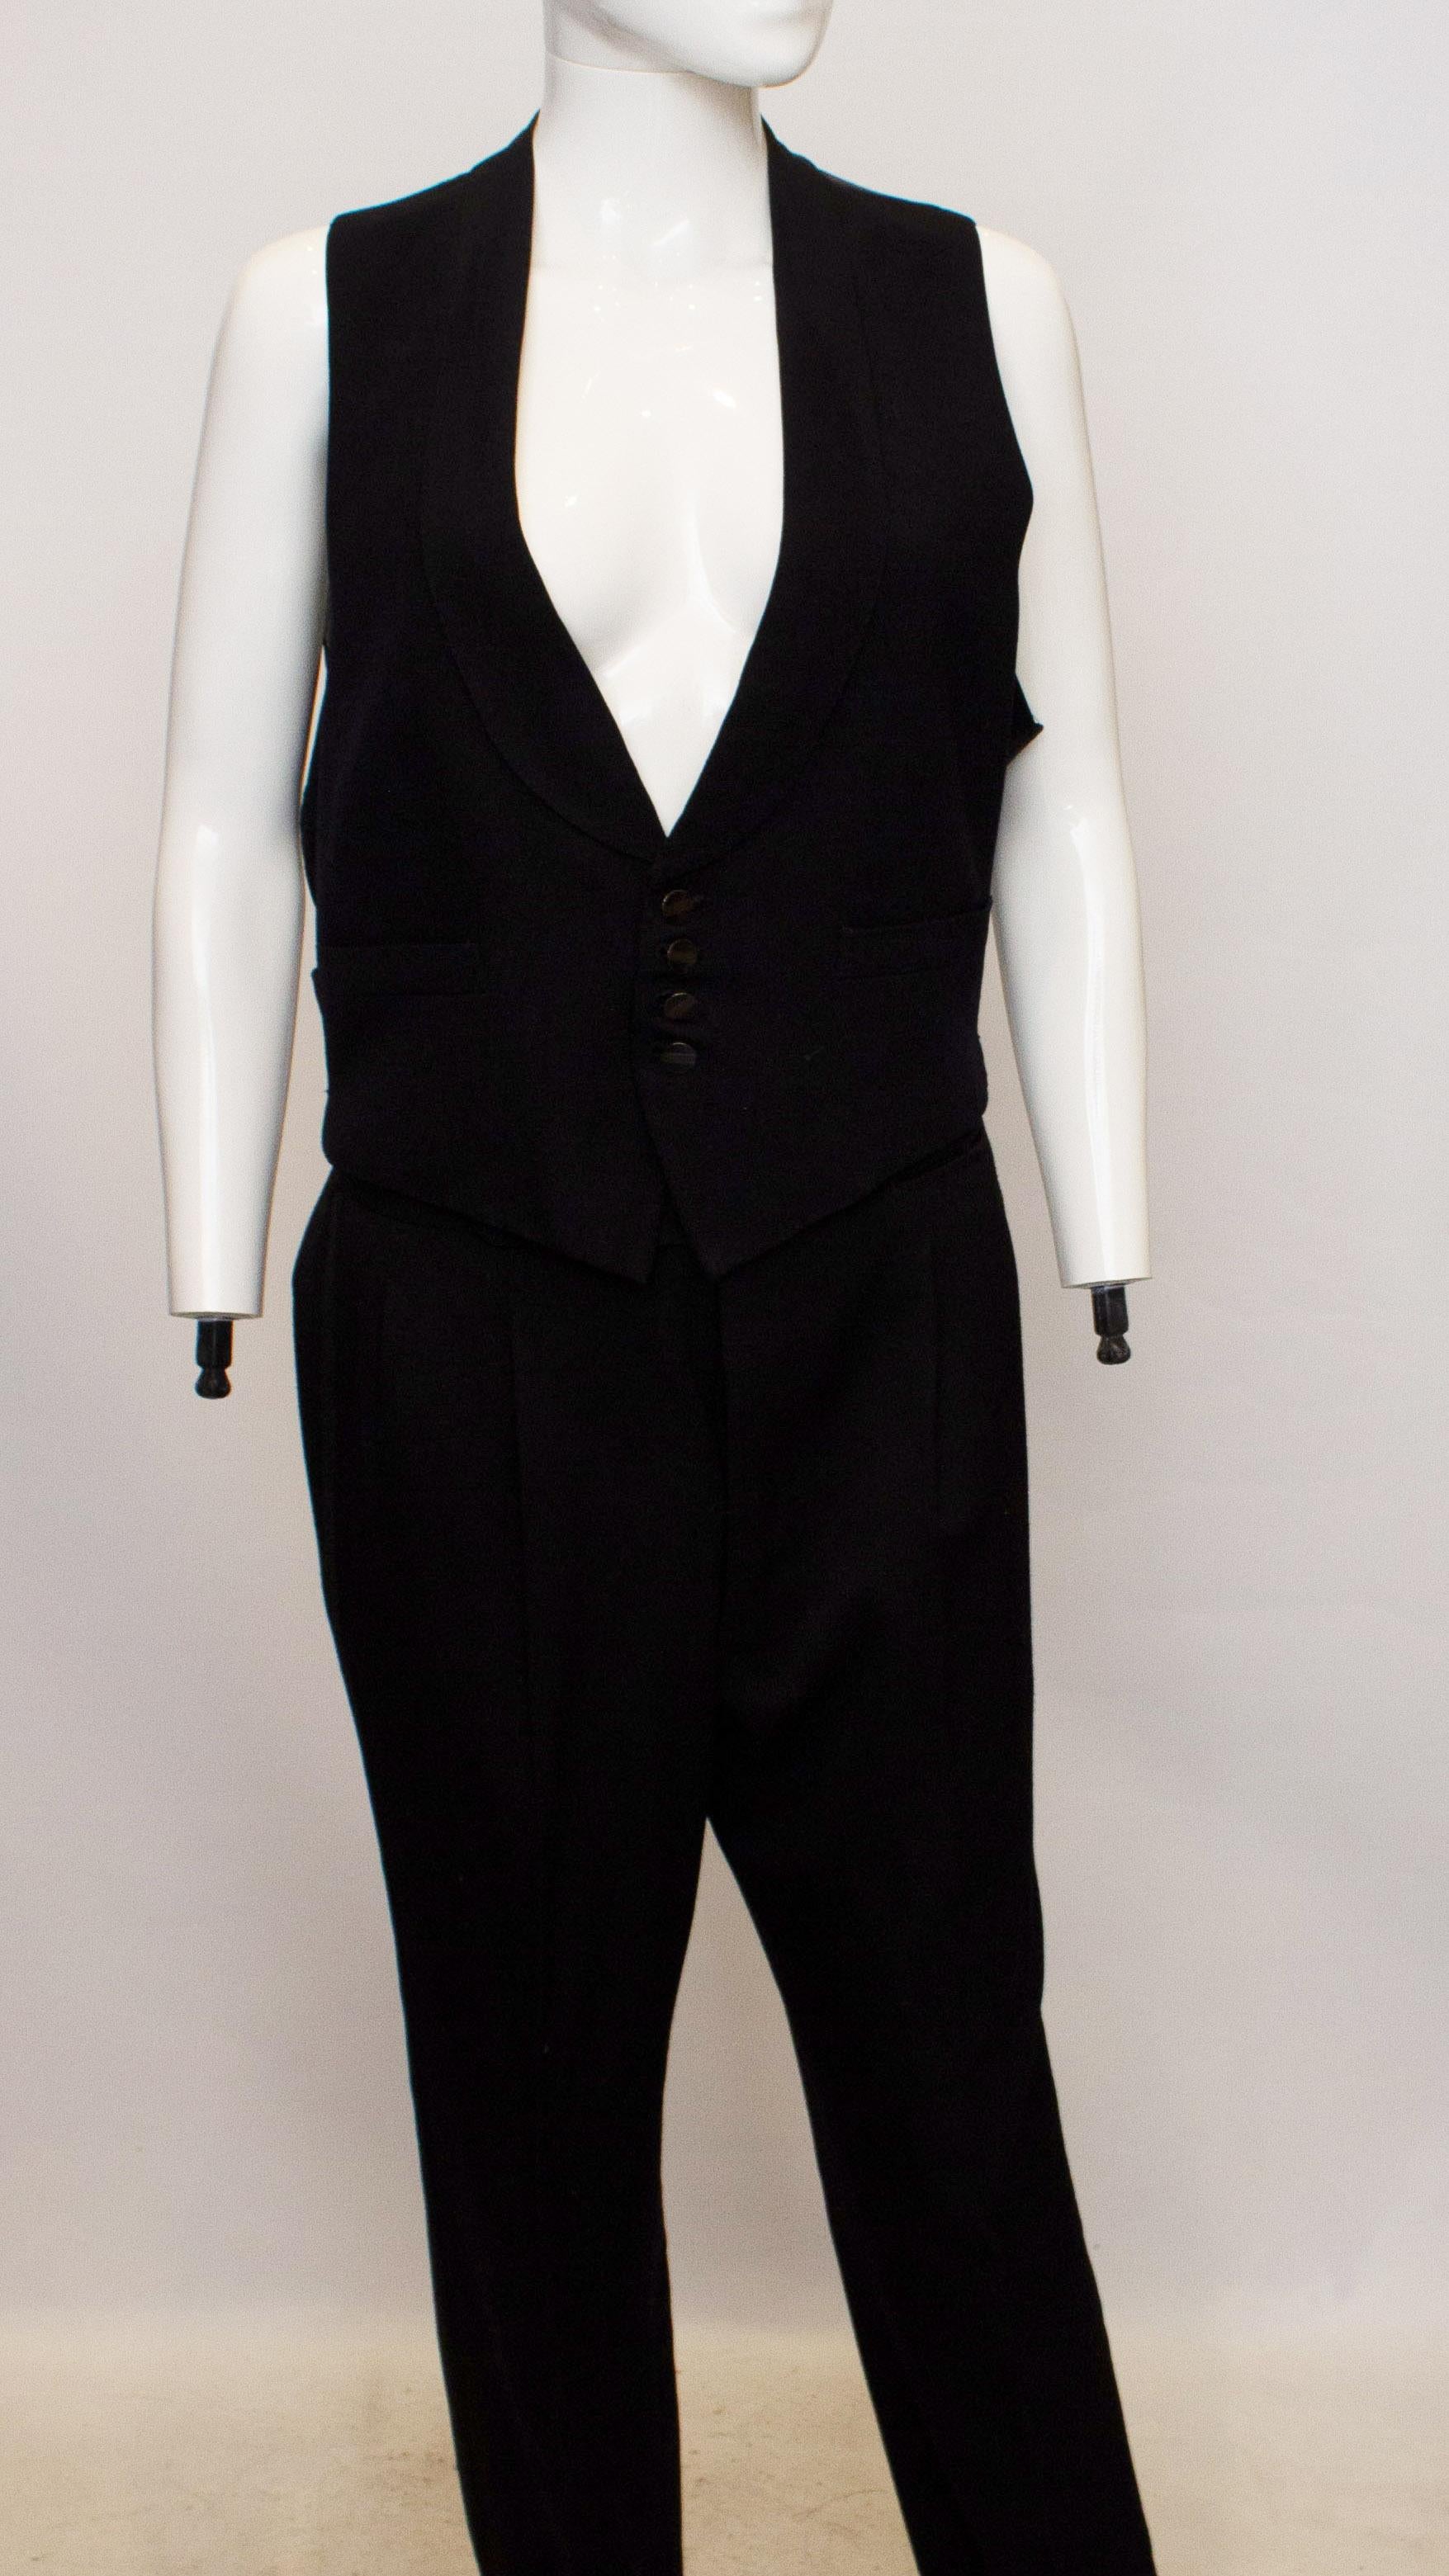 Black Rare Vintage Trousers by A Caraceni made for Karl Lagerfeld